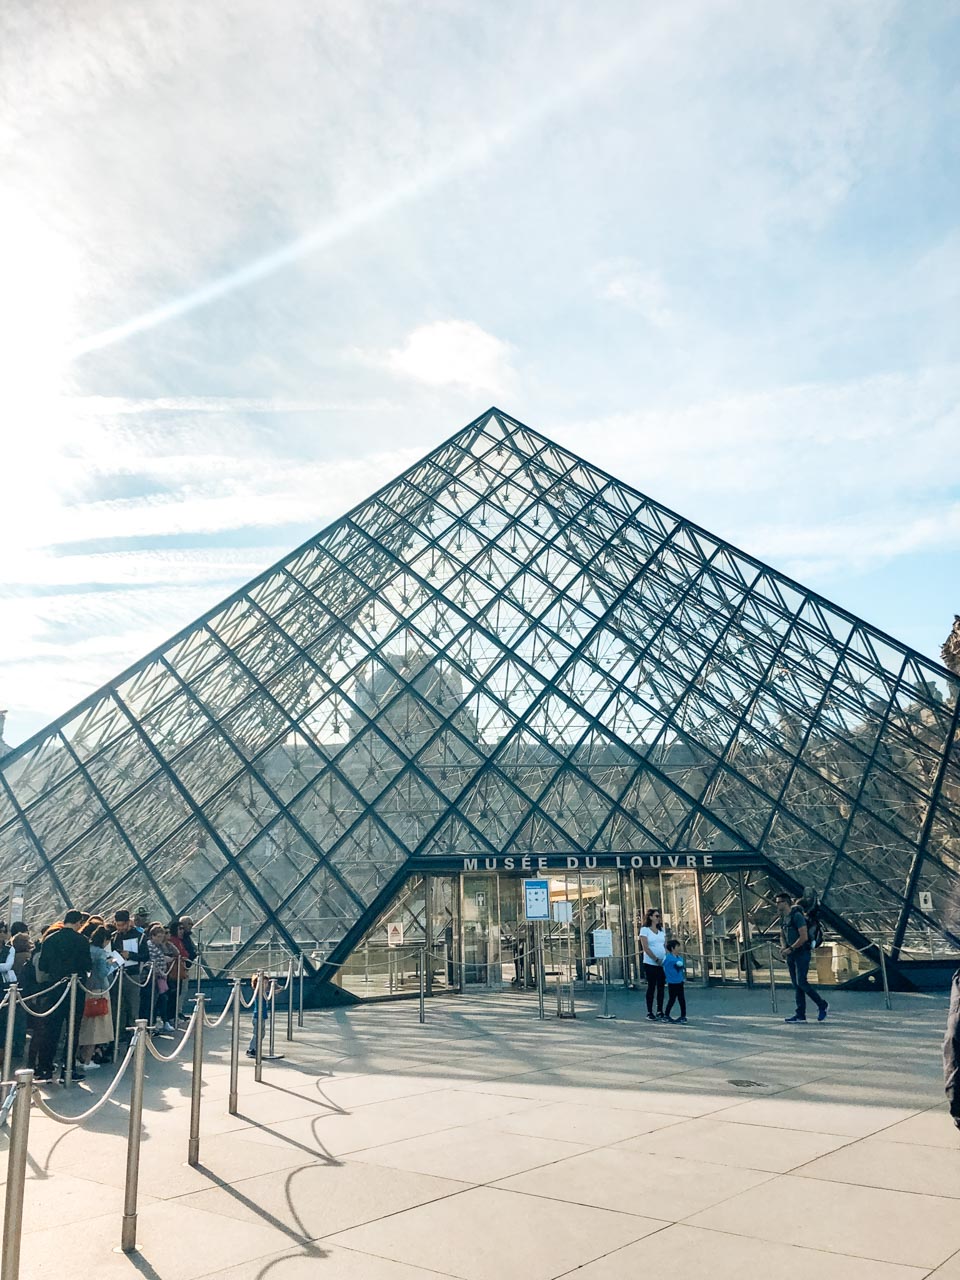 Crowds of tourists queueing outside the glass pyramid to get inside the Louvre Museum in Paris